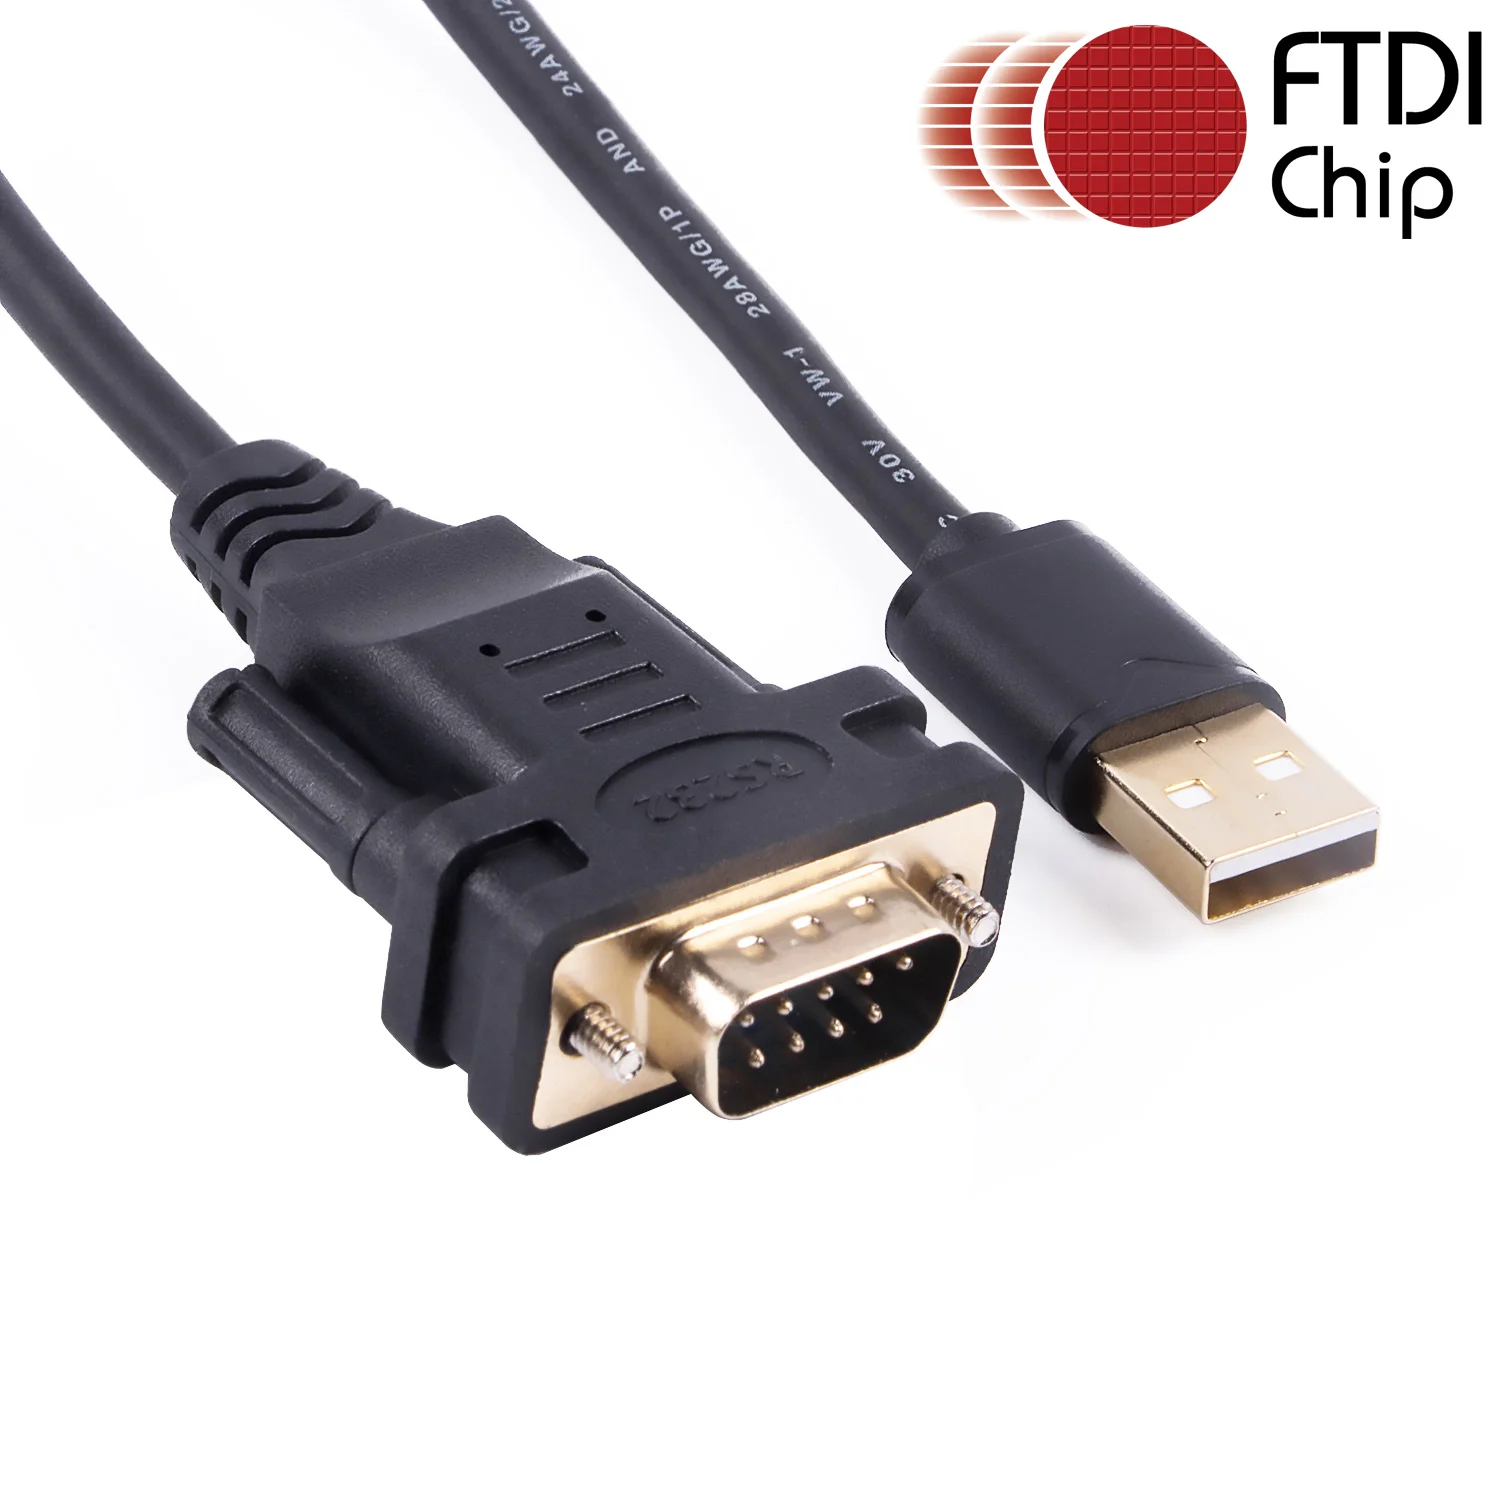 

USB to RS232 Serial Cable Converter PDA DB9 Male 9 Pin Cable Adapter FTDI for Win 11 10 7 8.1 XP Vista Mac OS Linux